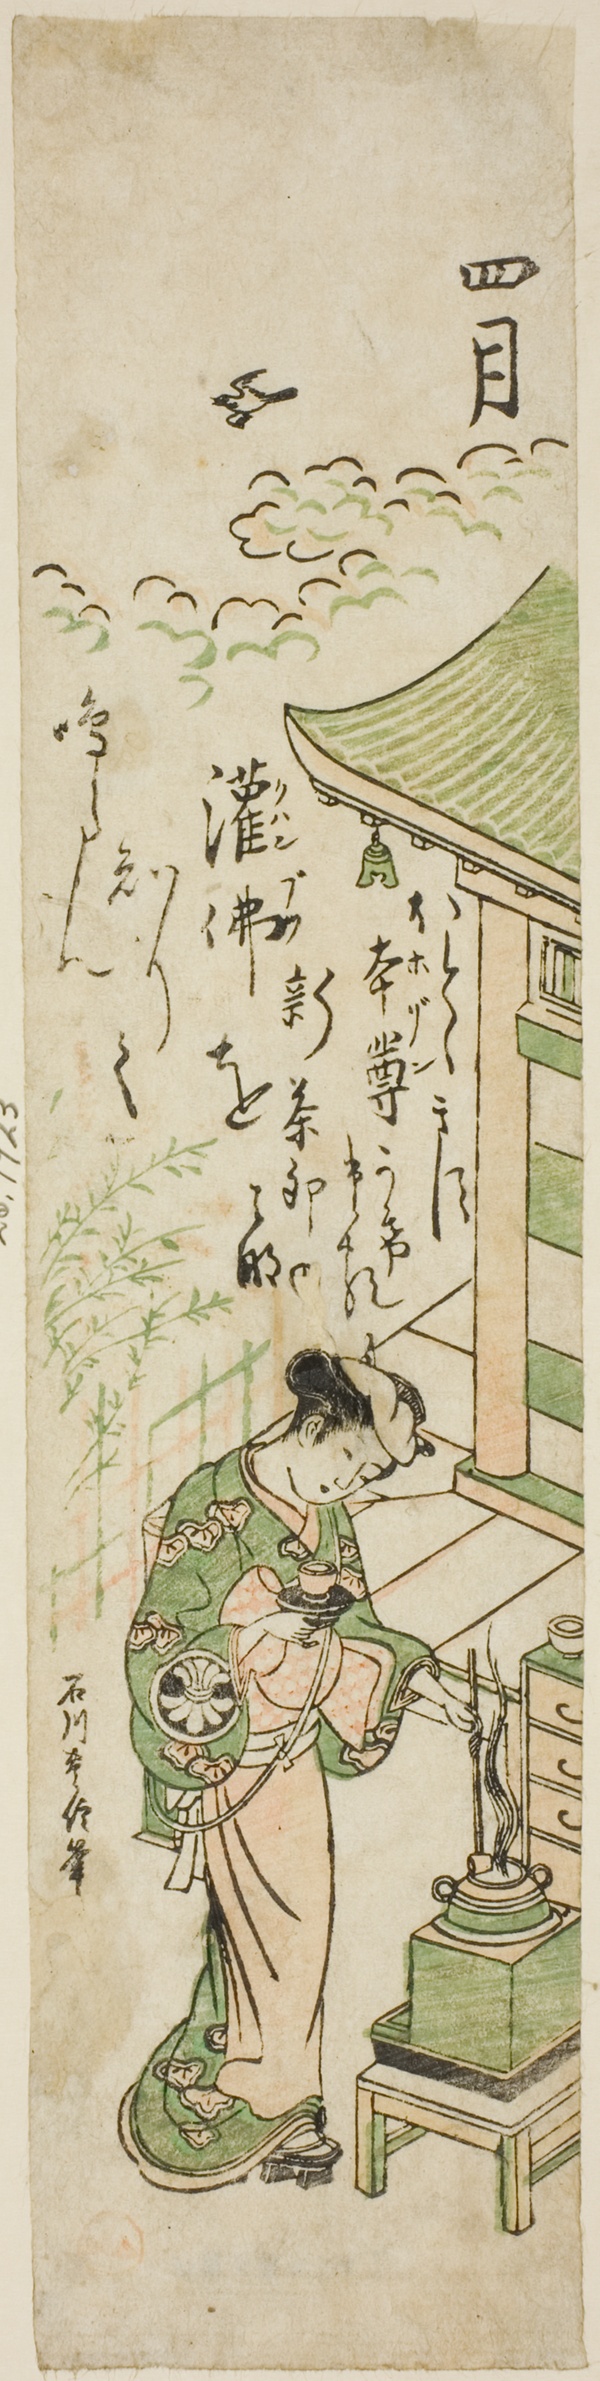 The Fourth Month (Shigatsu), from an untitled series of twelve months